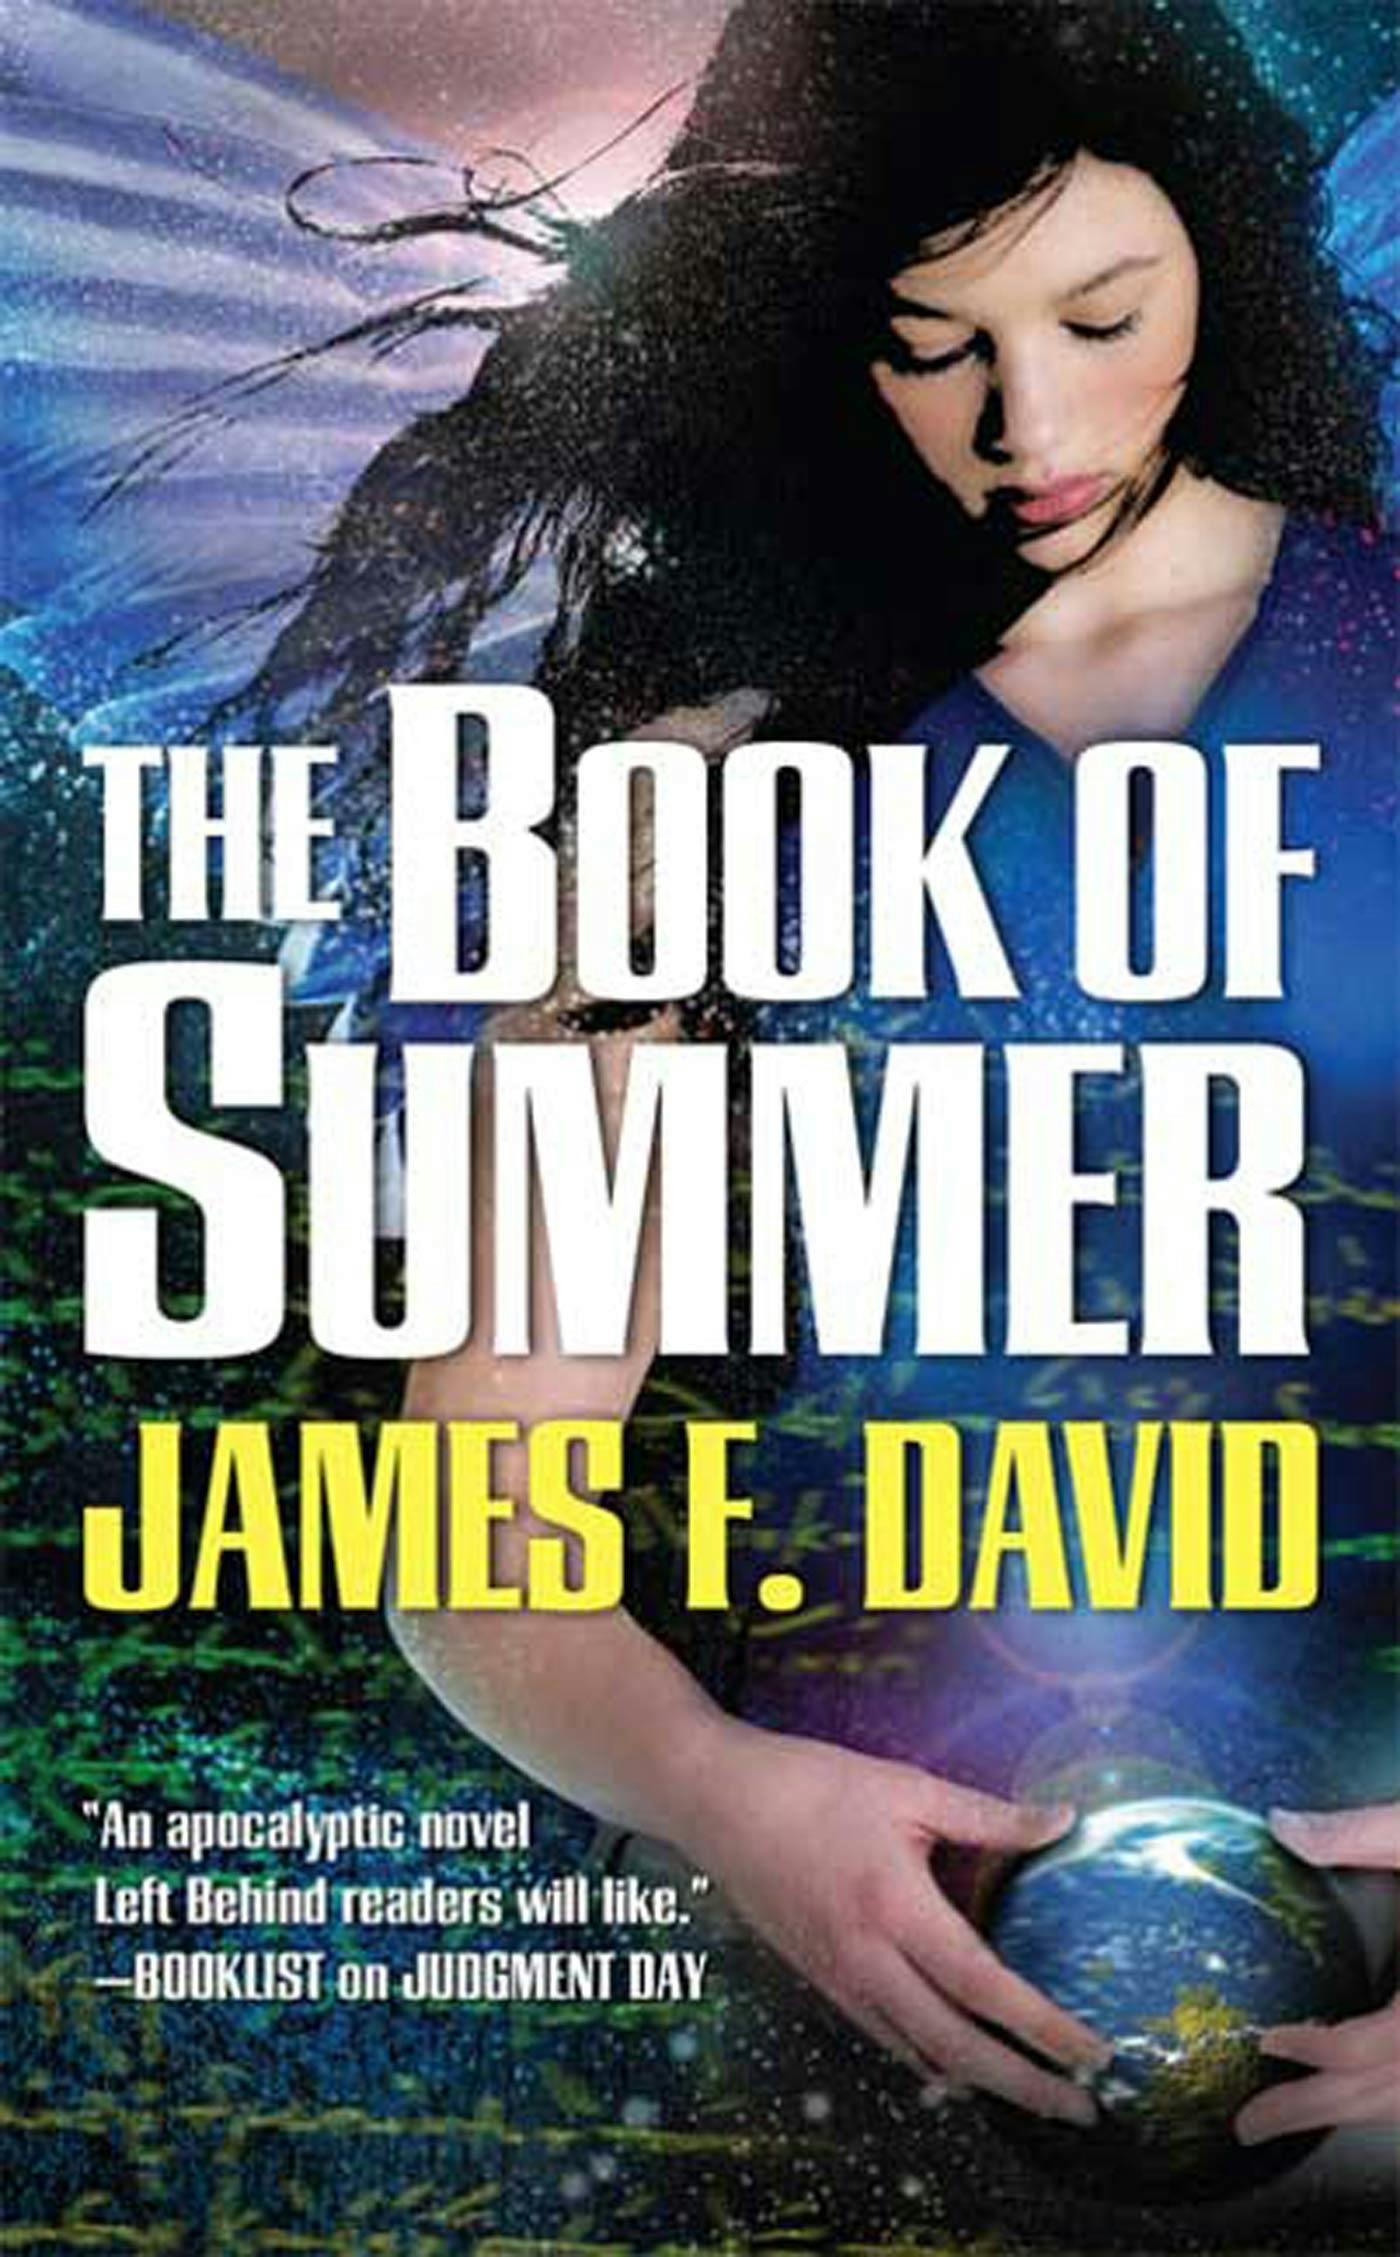 Cover for the book titled as: The Book of Summer